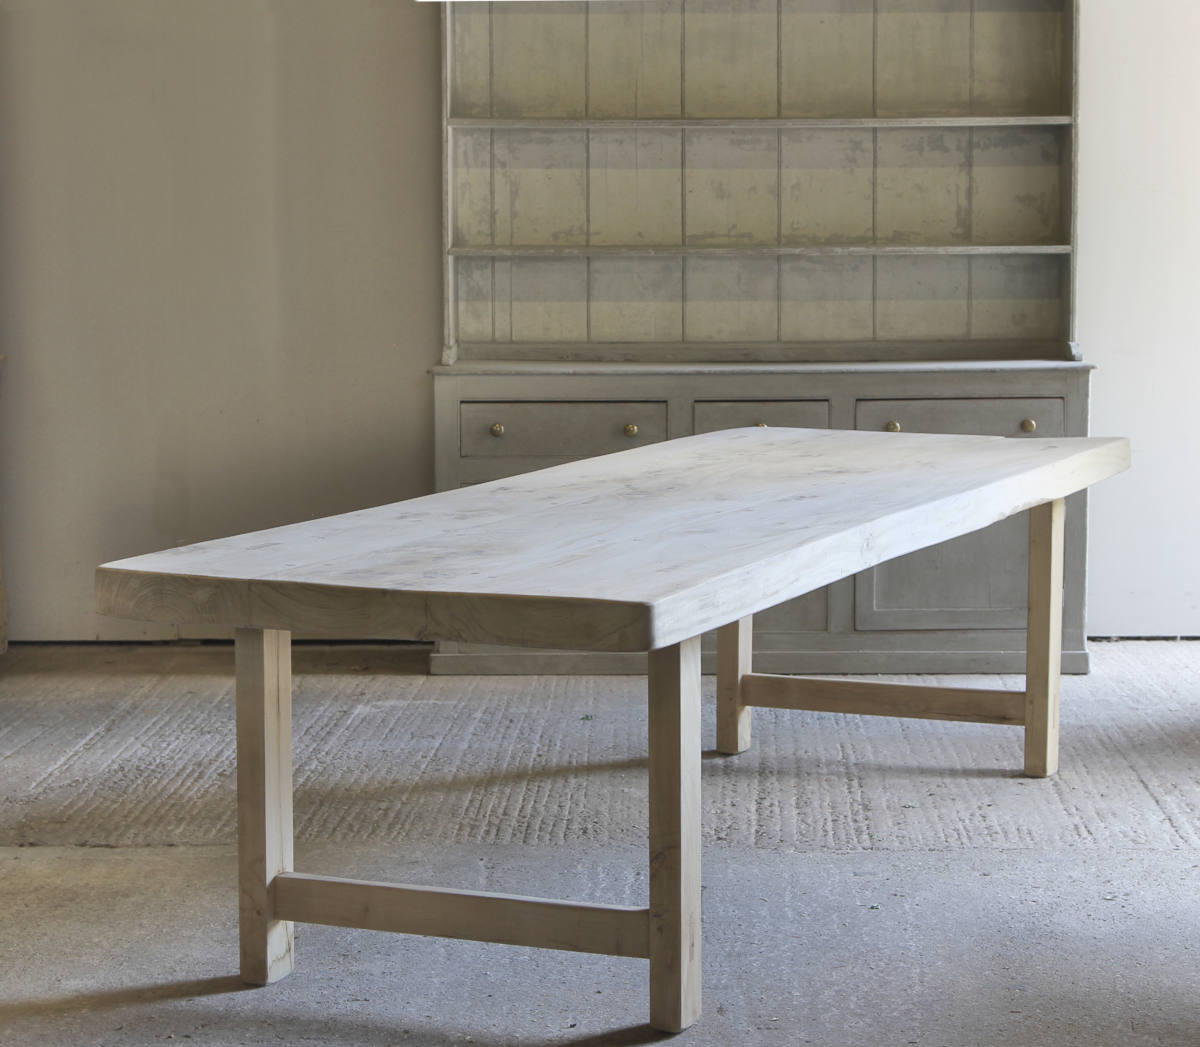 Imposing Normandy table with a thick chunky two plank top